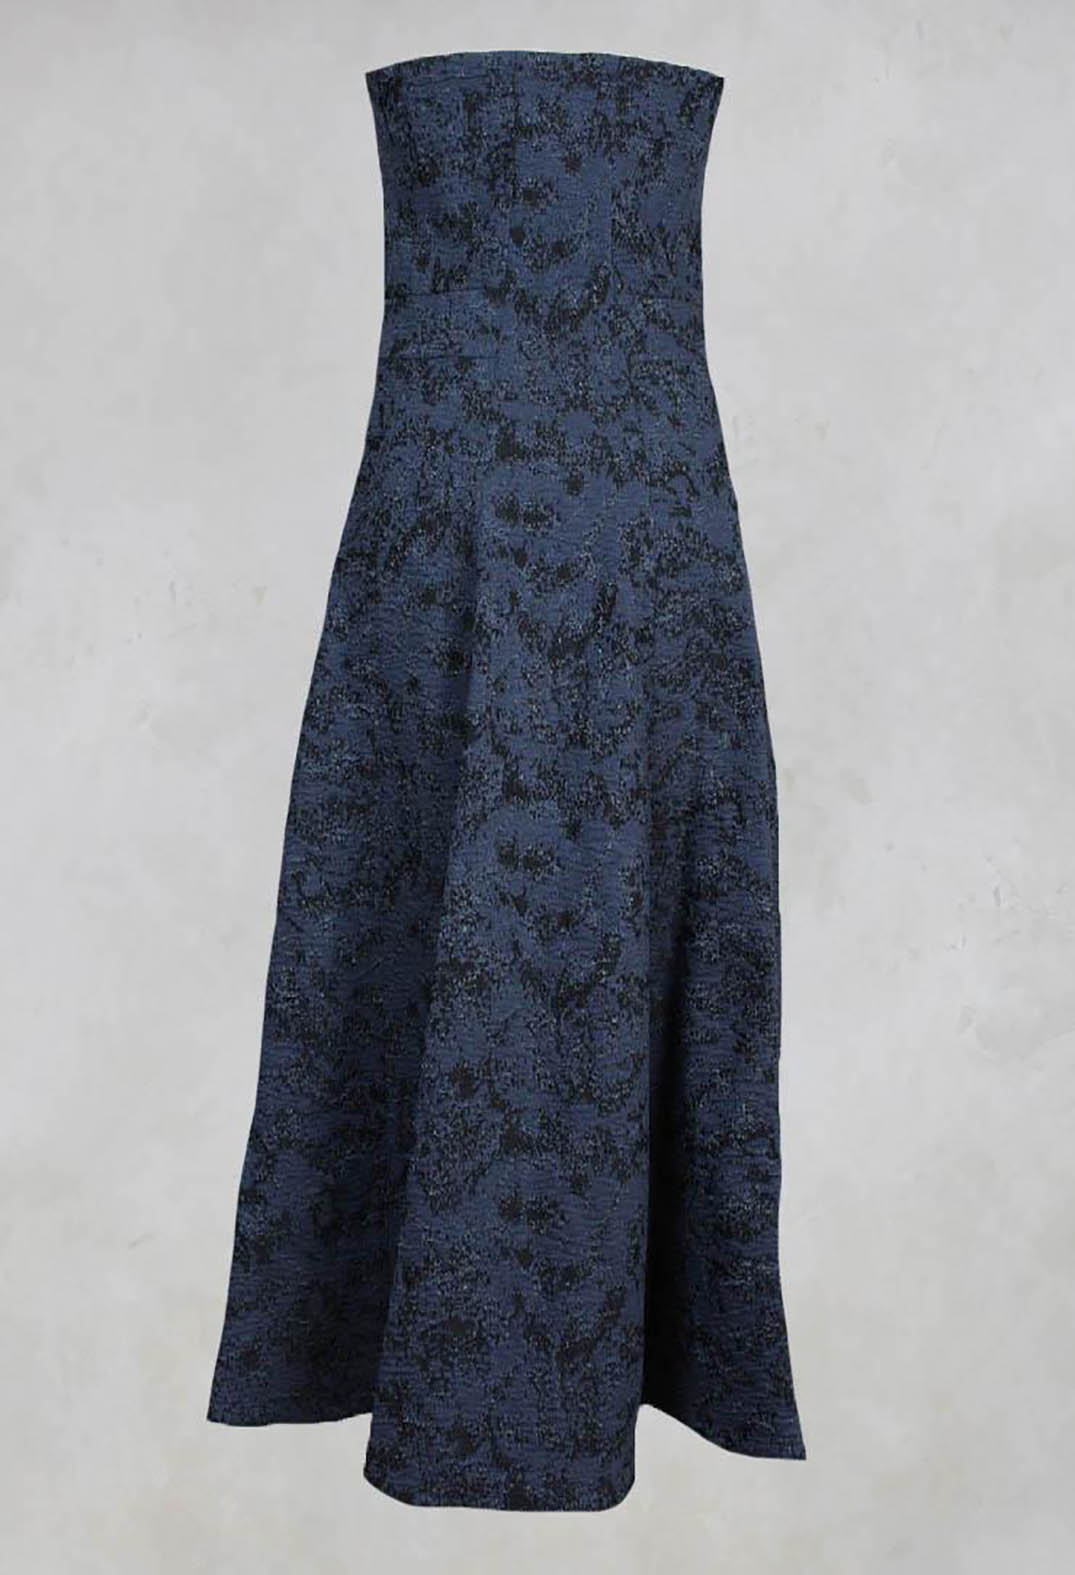 Strapless Dress with Textured Pattern and Flared Skirt in Ink